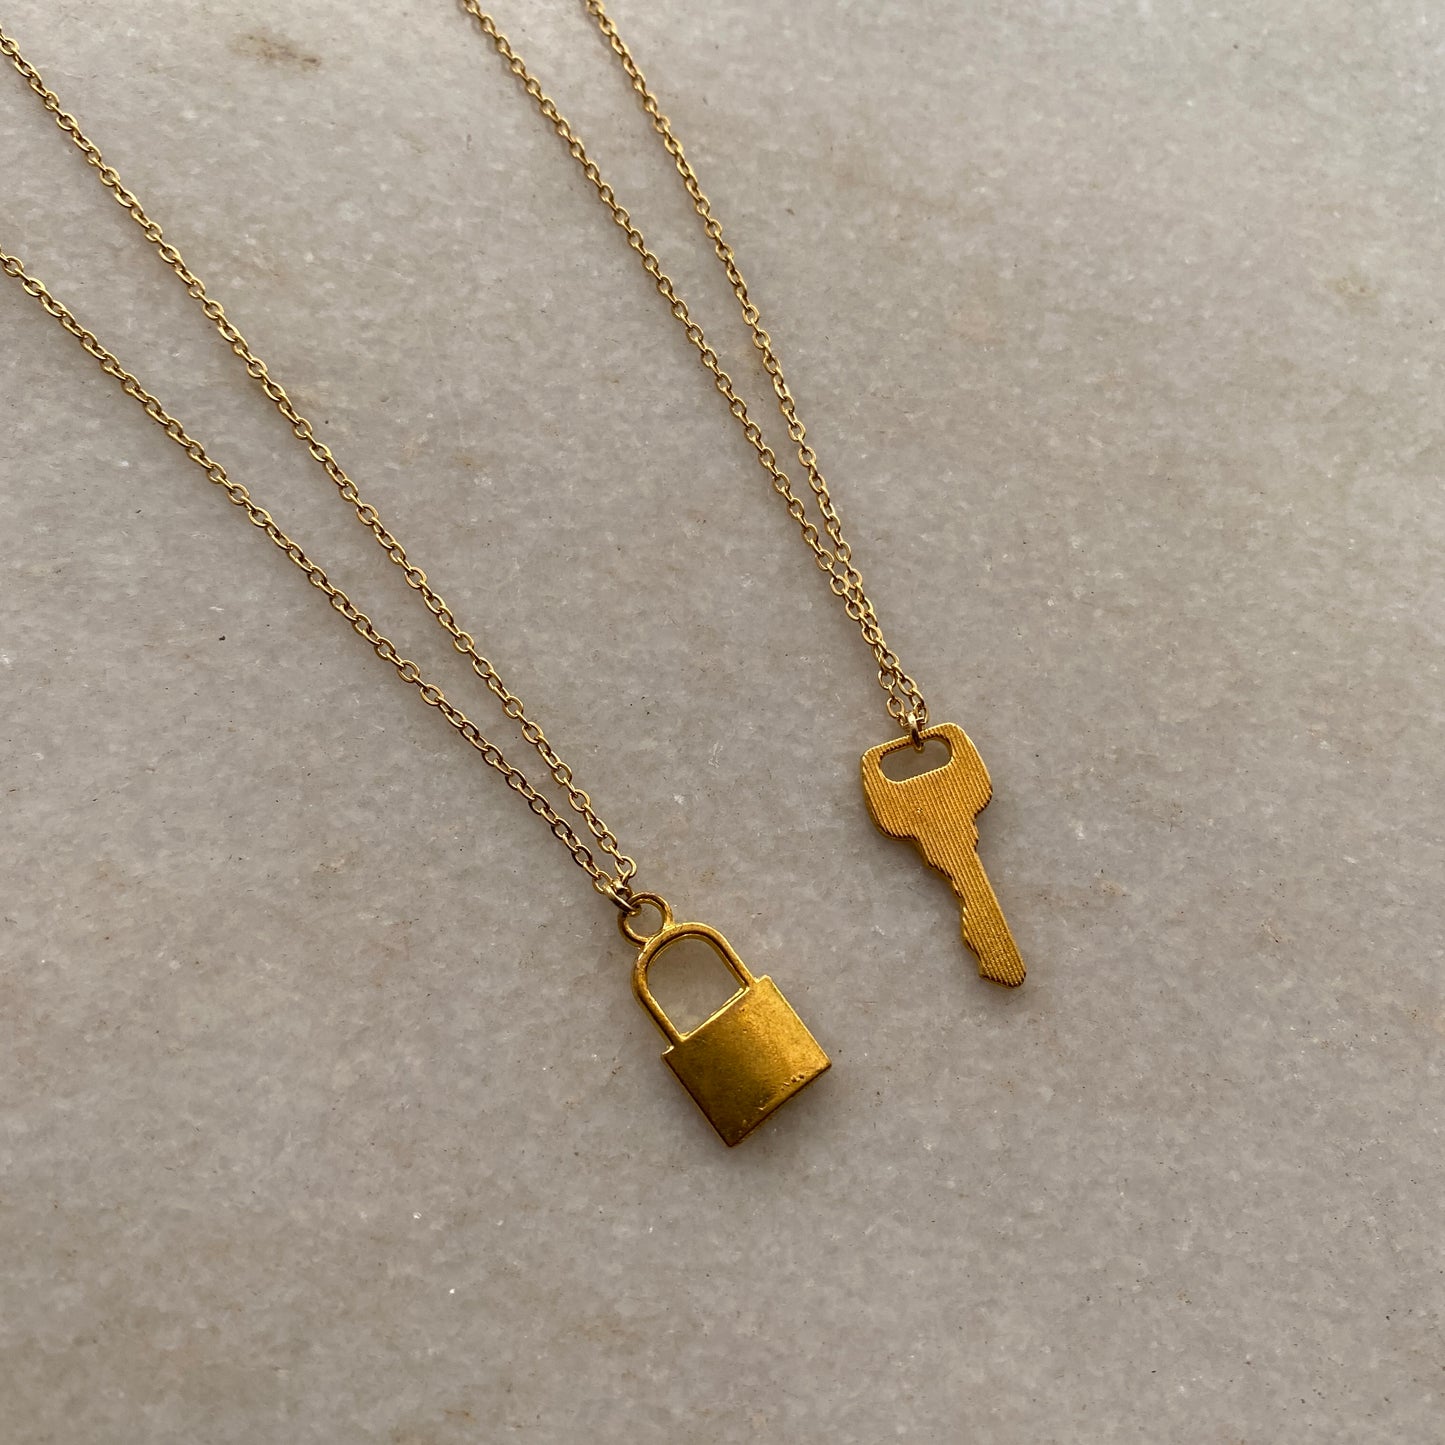 BEST FRIENDS GOLDEN LOCK AND KEY NECKLACE